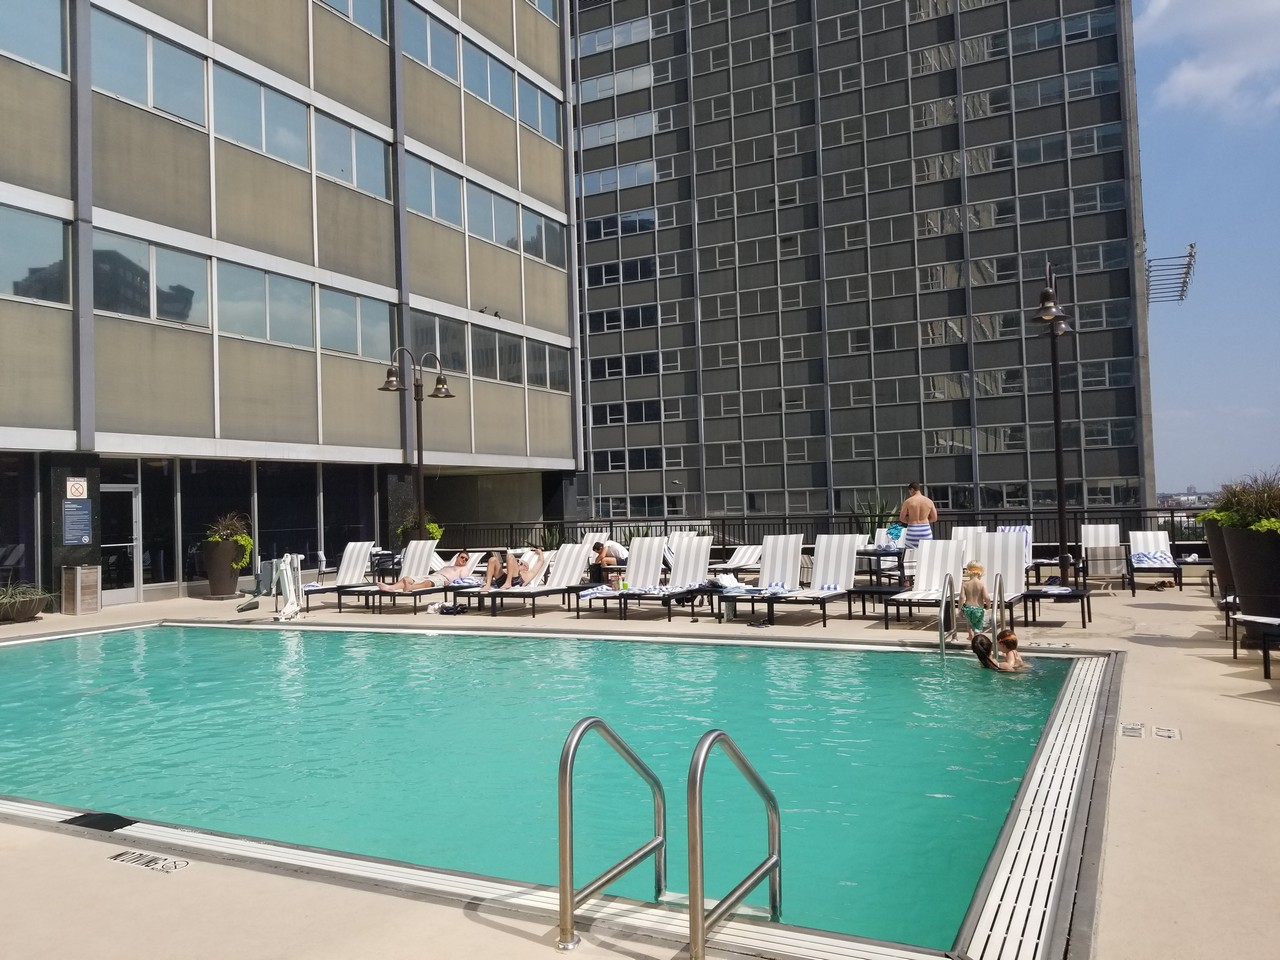 a pool with lounge chairs and people in it